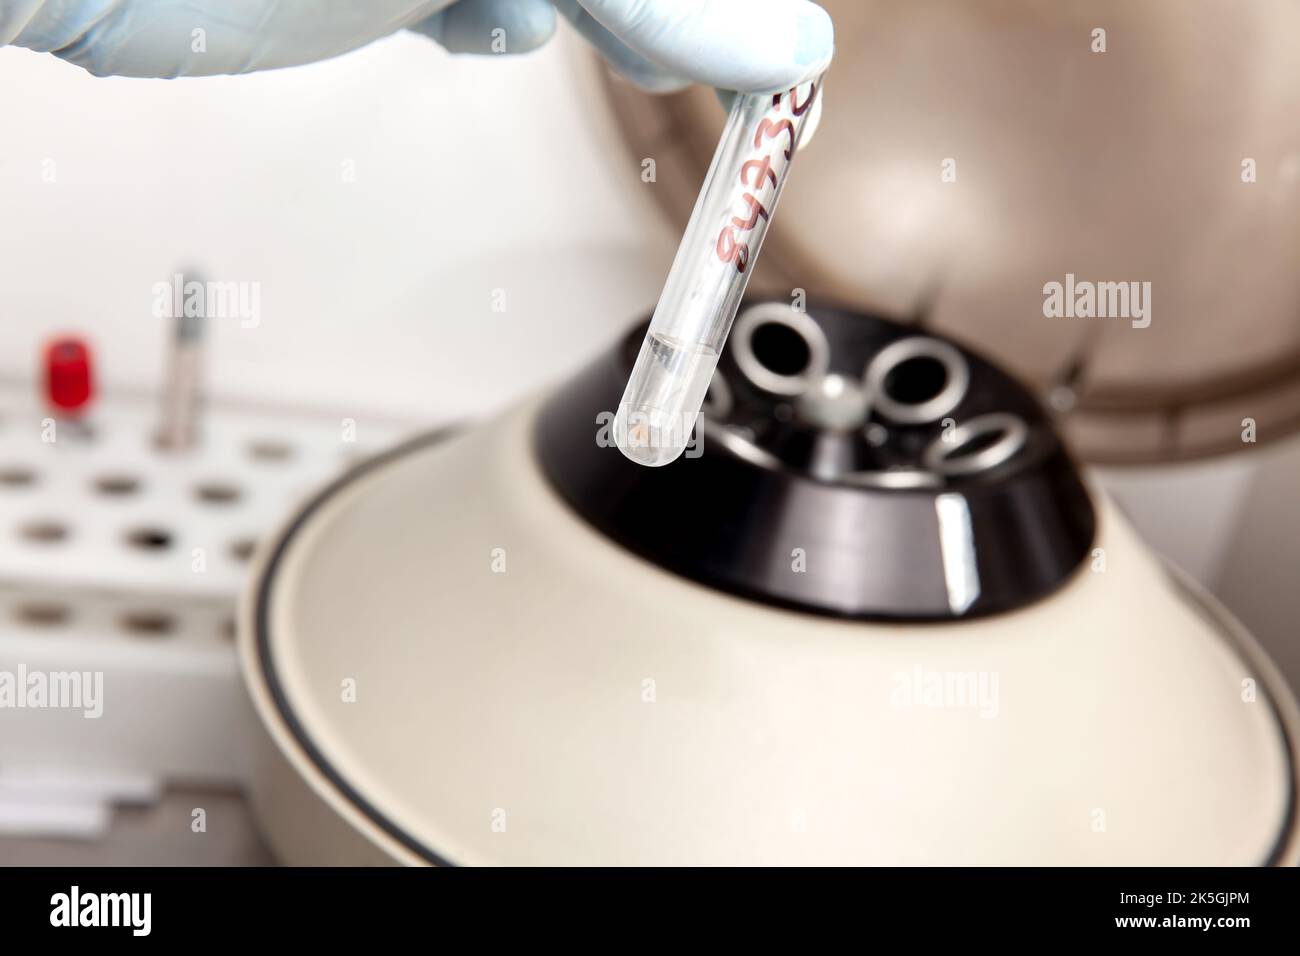 Scientist preparing a peritoneal fluid sample for cytology analysis in the laboratory. Cancer diagnosis concept. Medical concept. Stock Photo